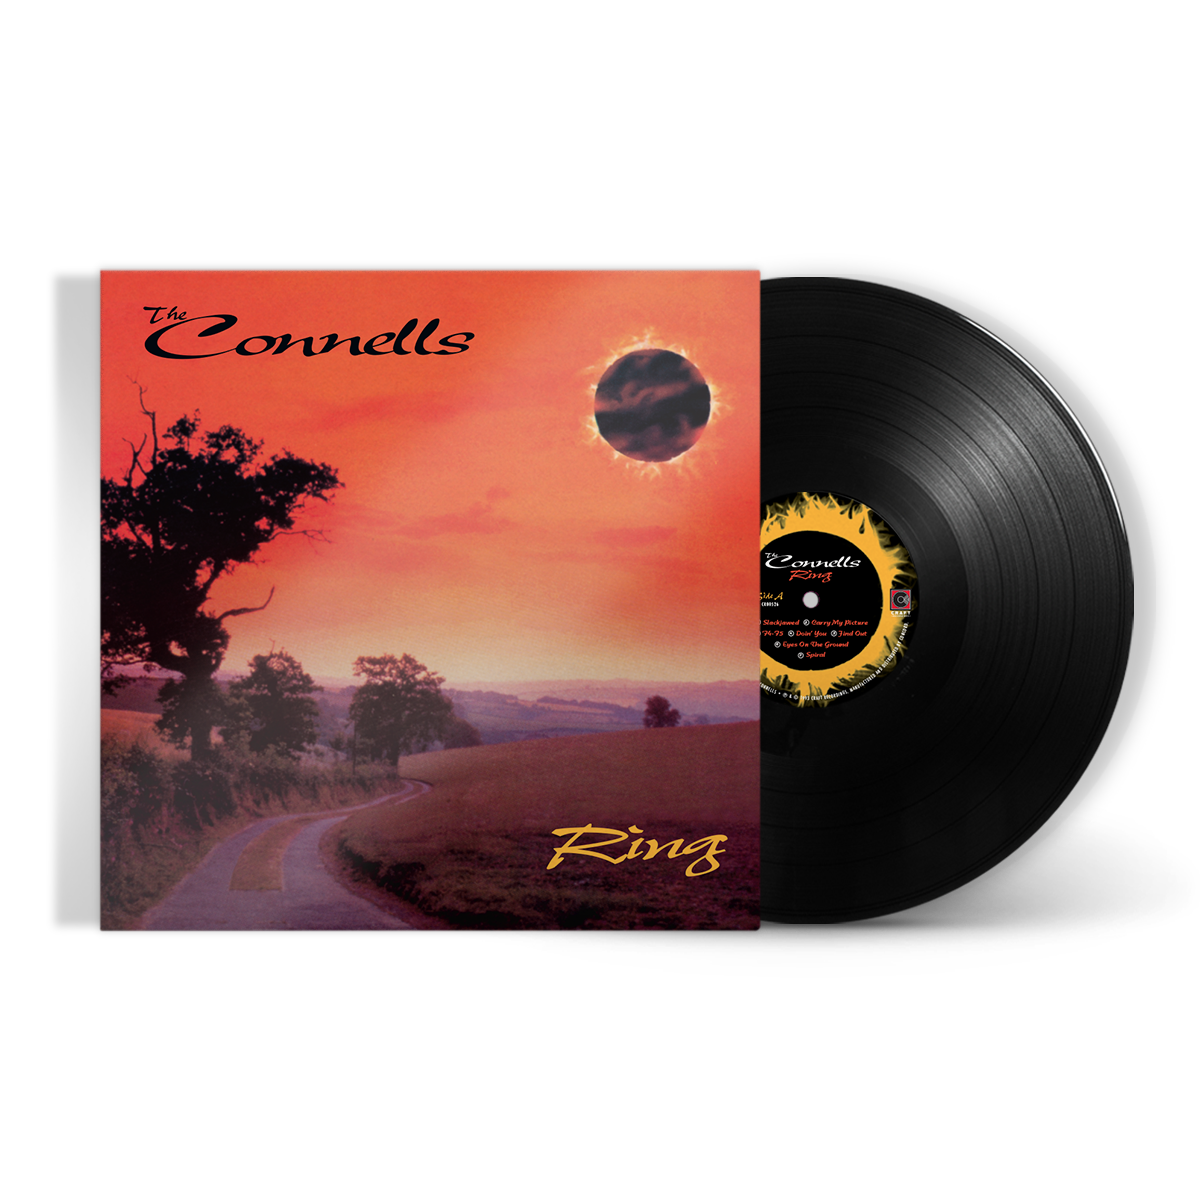 The Connells - Ring - LP (Black)